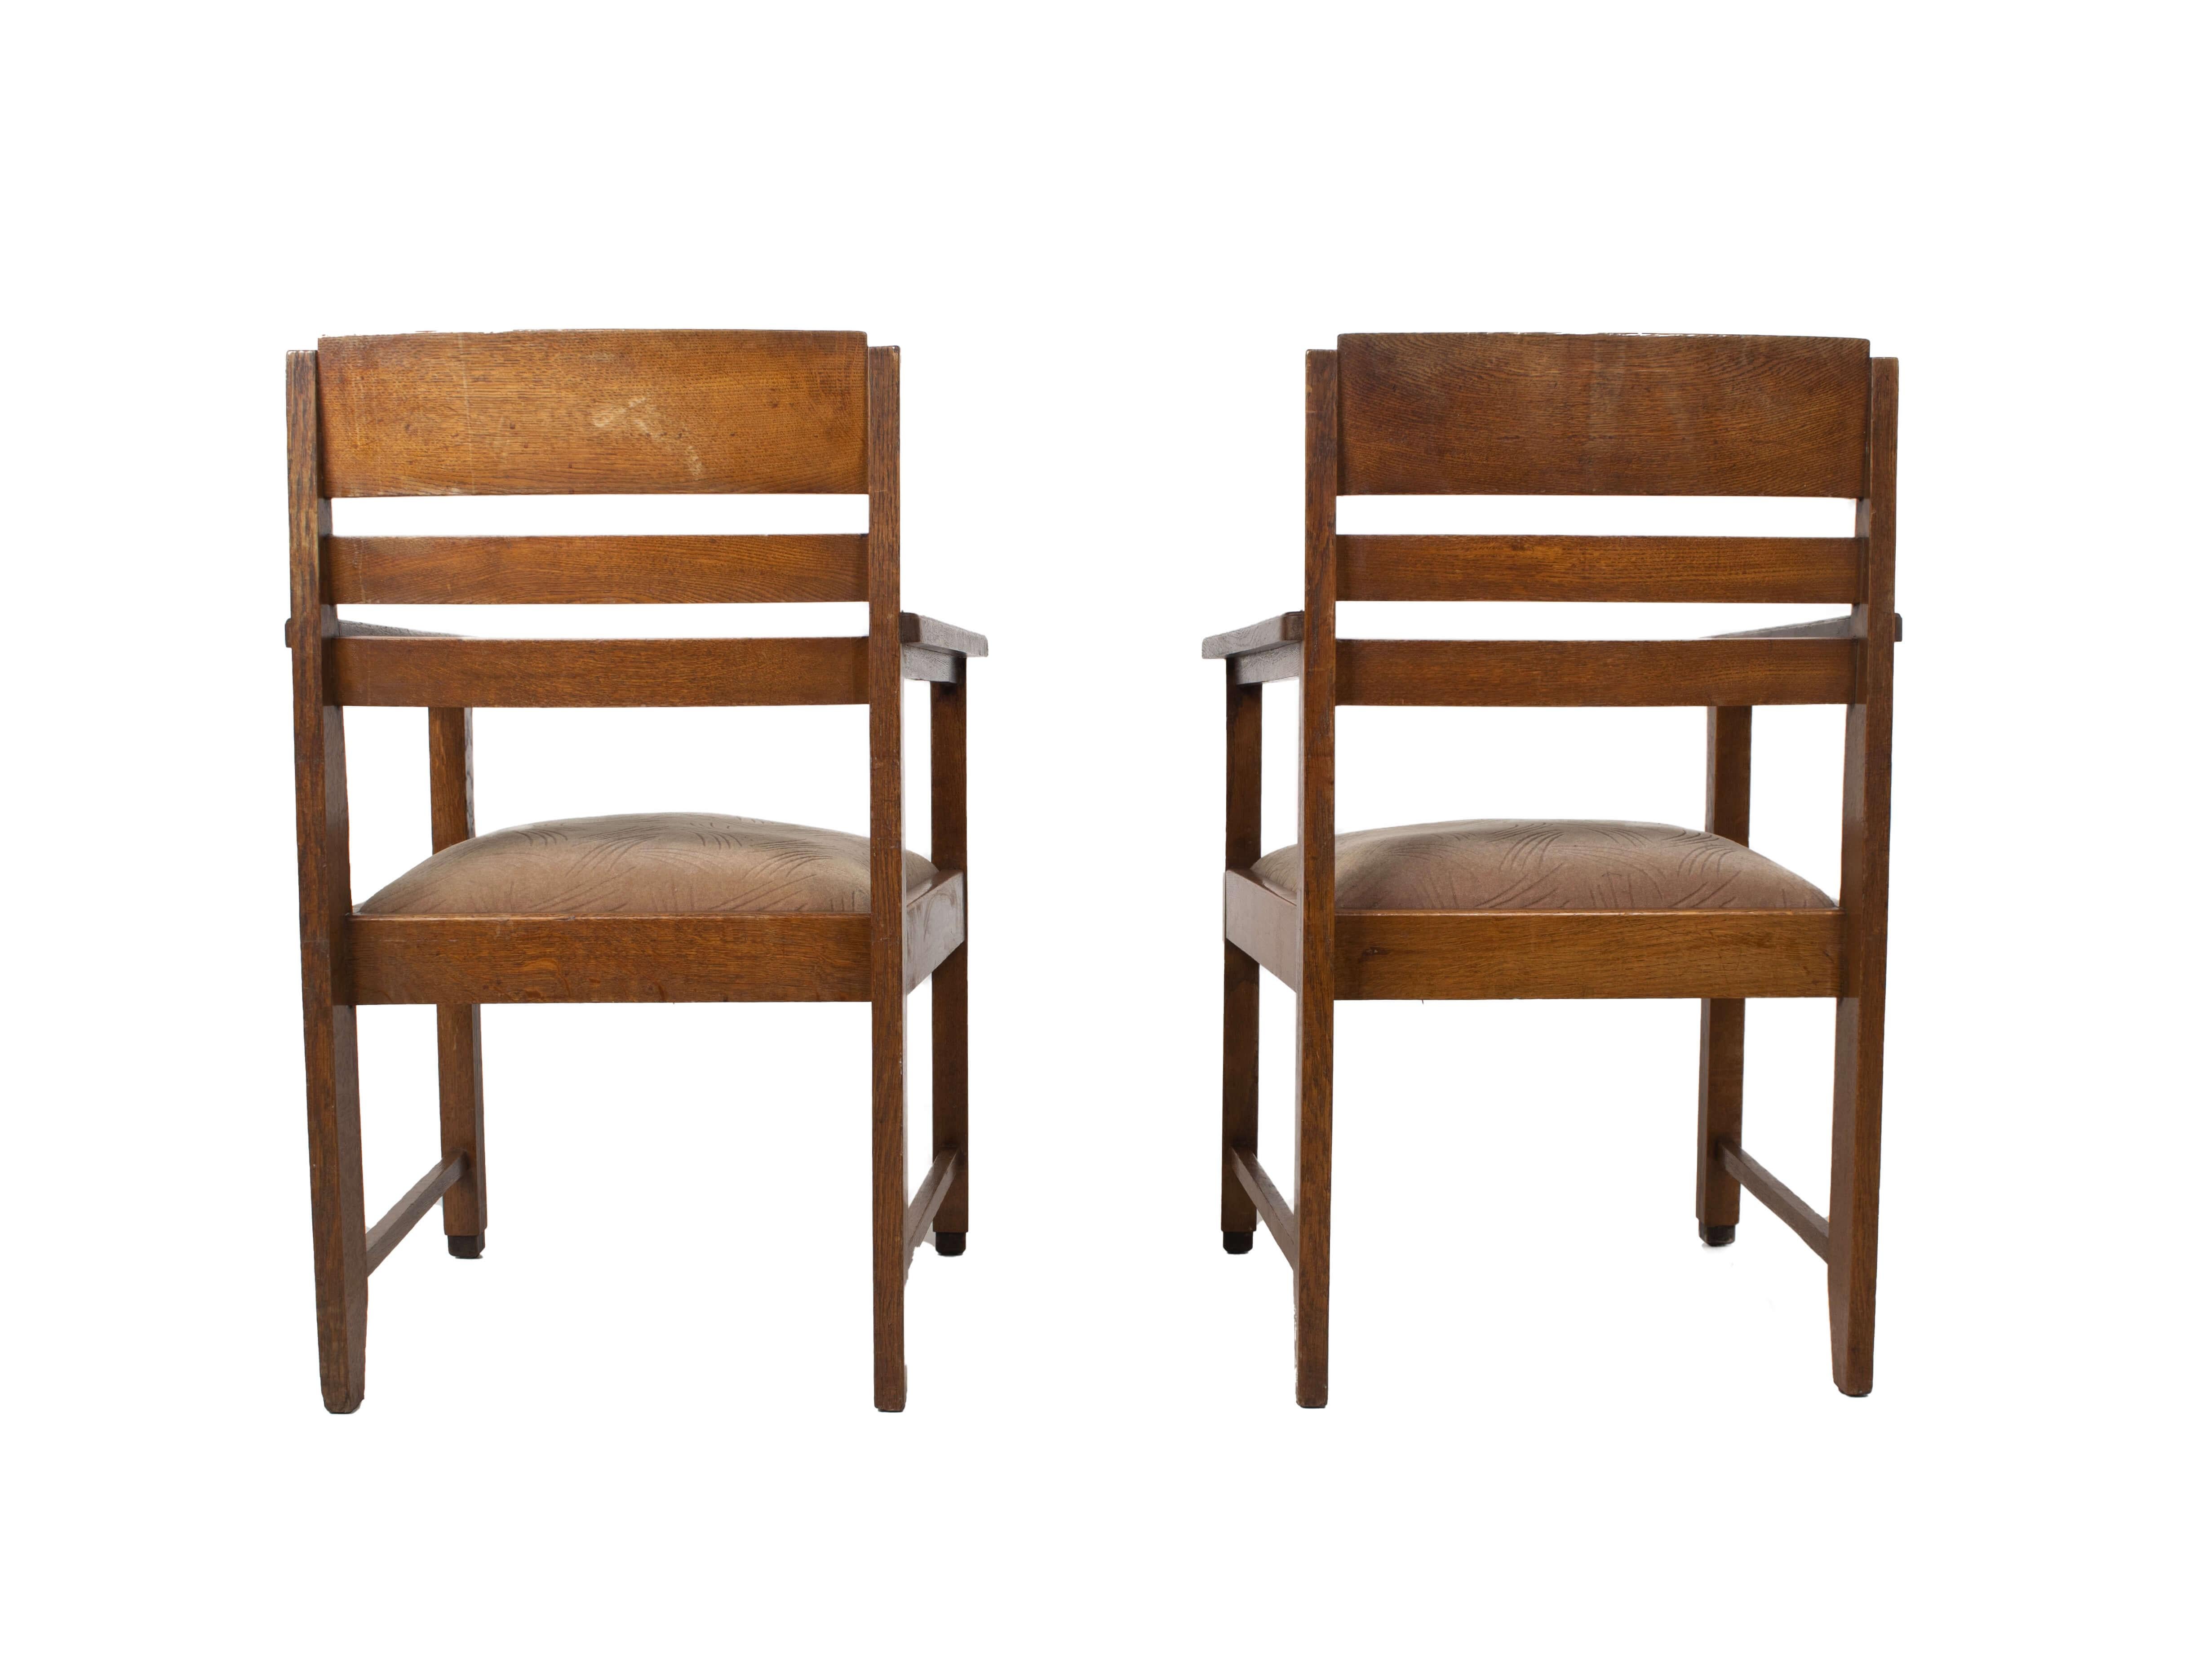 Art Deco Set of Amsterdam School Arm Chairs, the Netherlands, 1930s